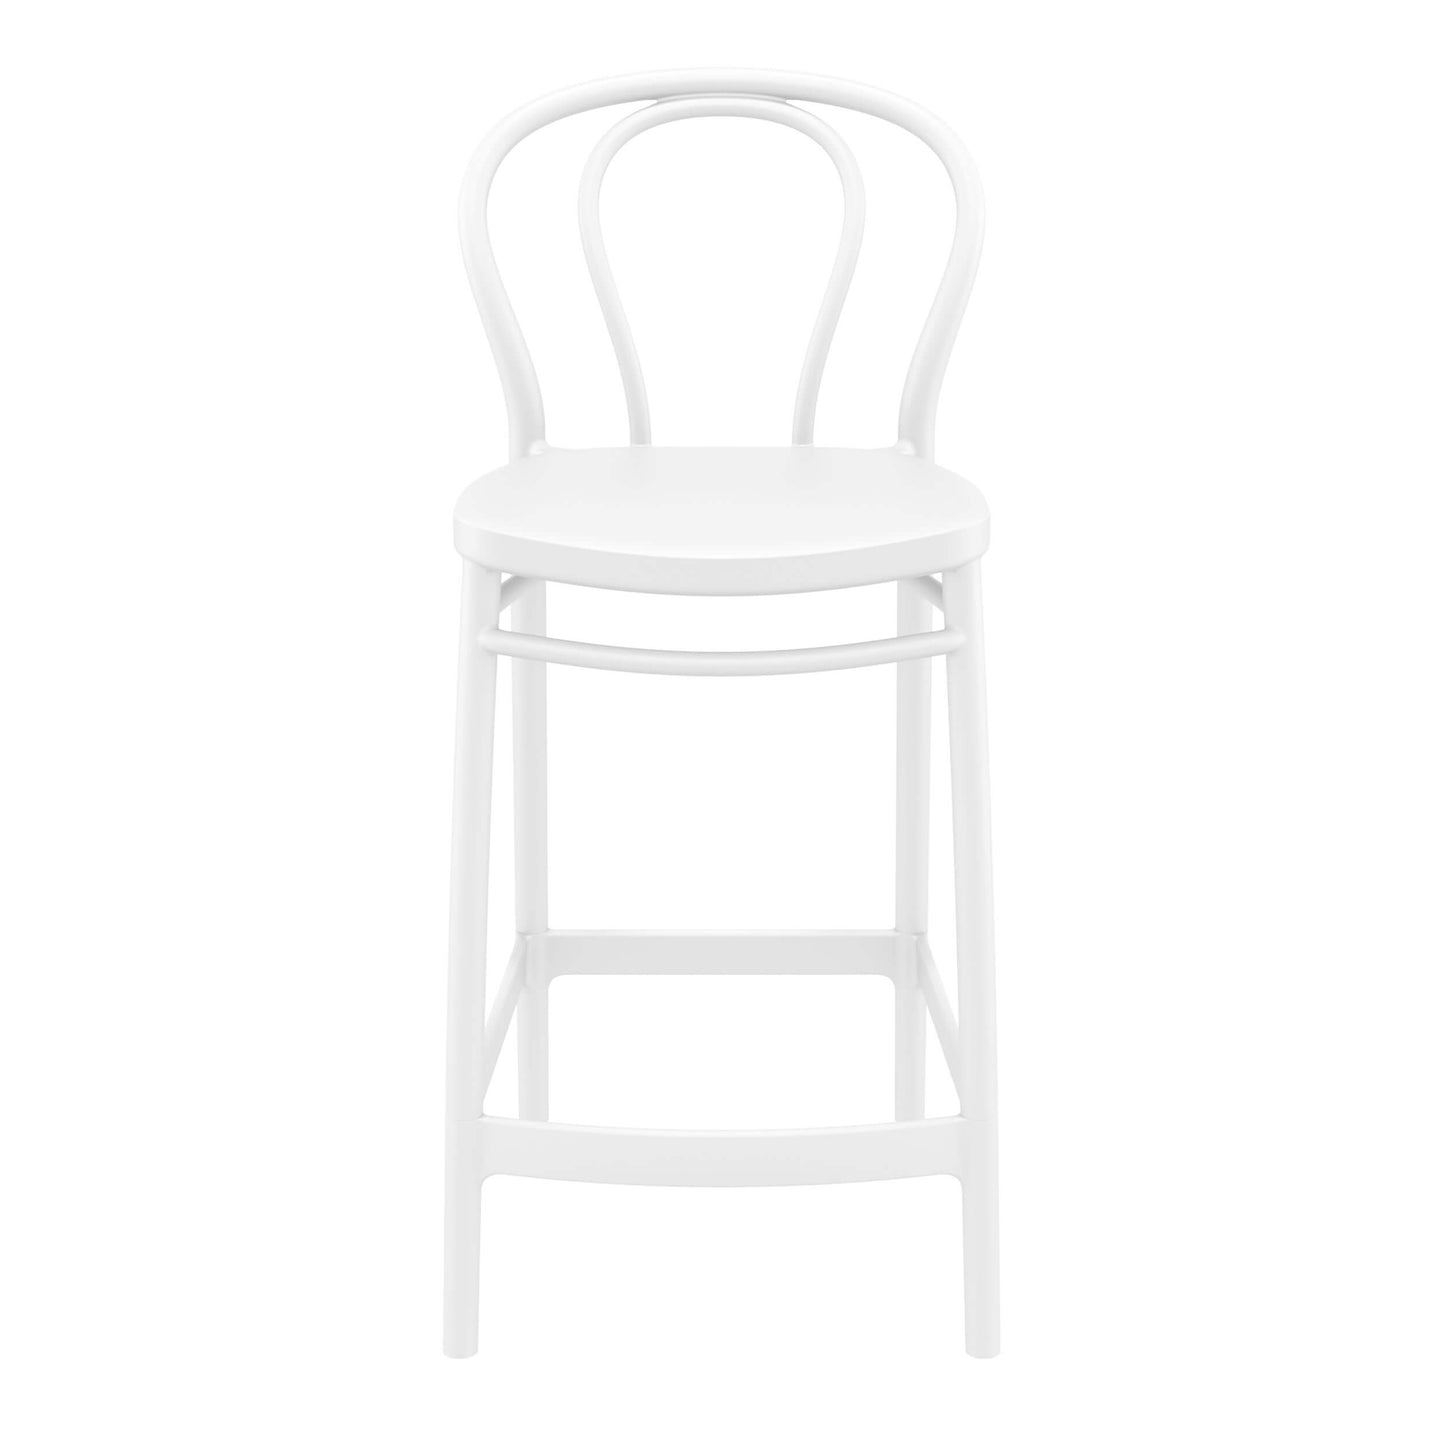 Vista | Plastic Country Style Outdoor Bar Stools | Set Of 4 | White